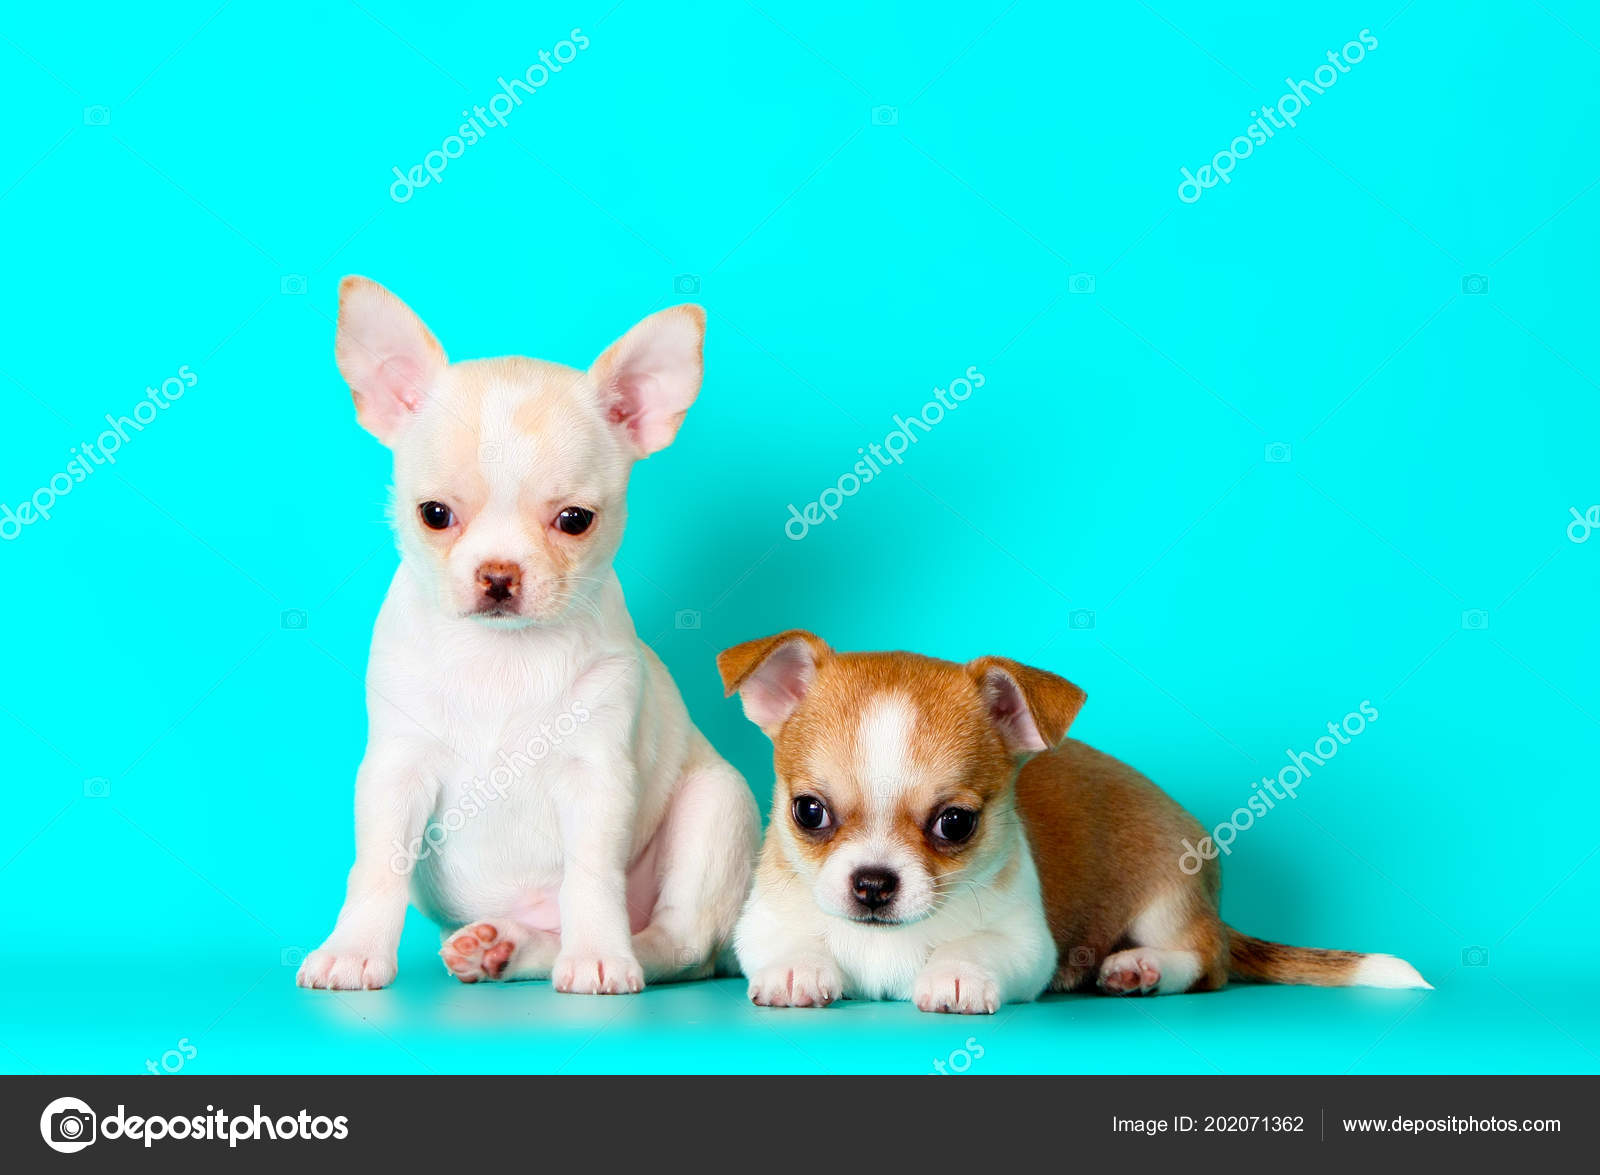 Puppy wallpapers Stock Photos, Royalty